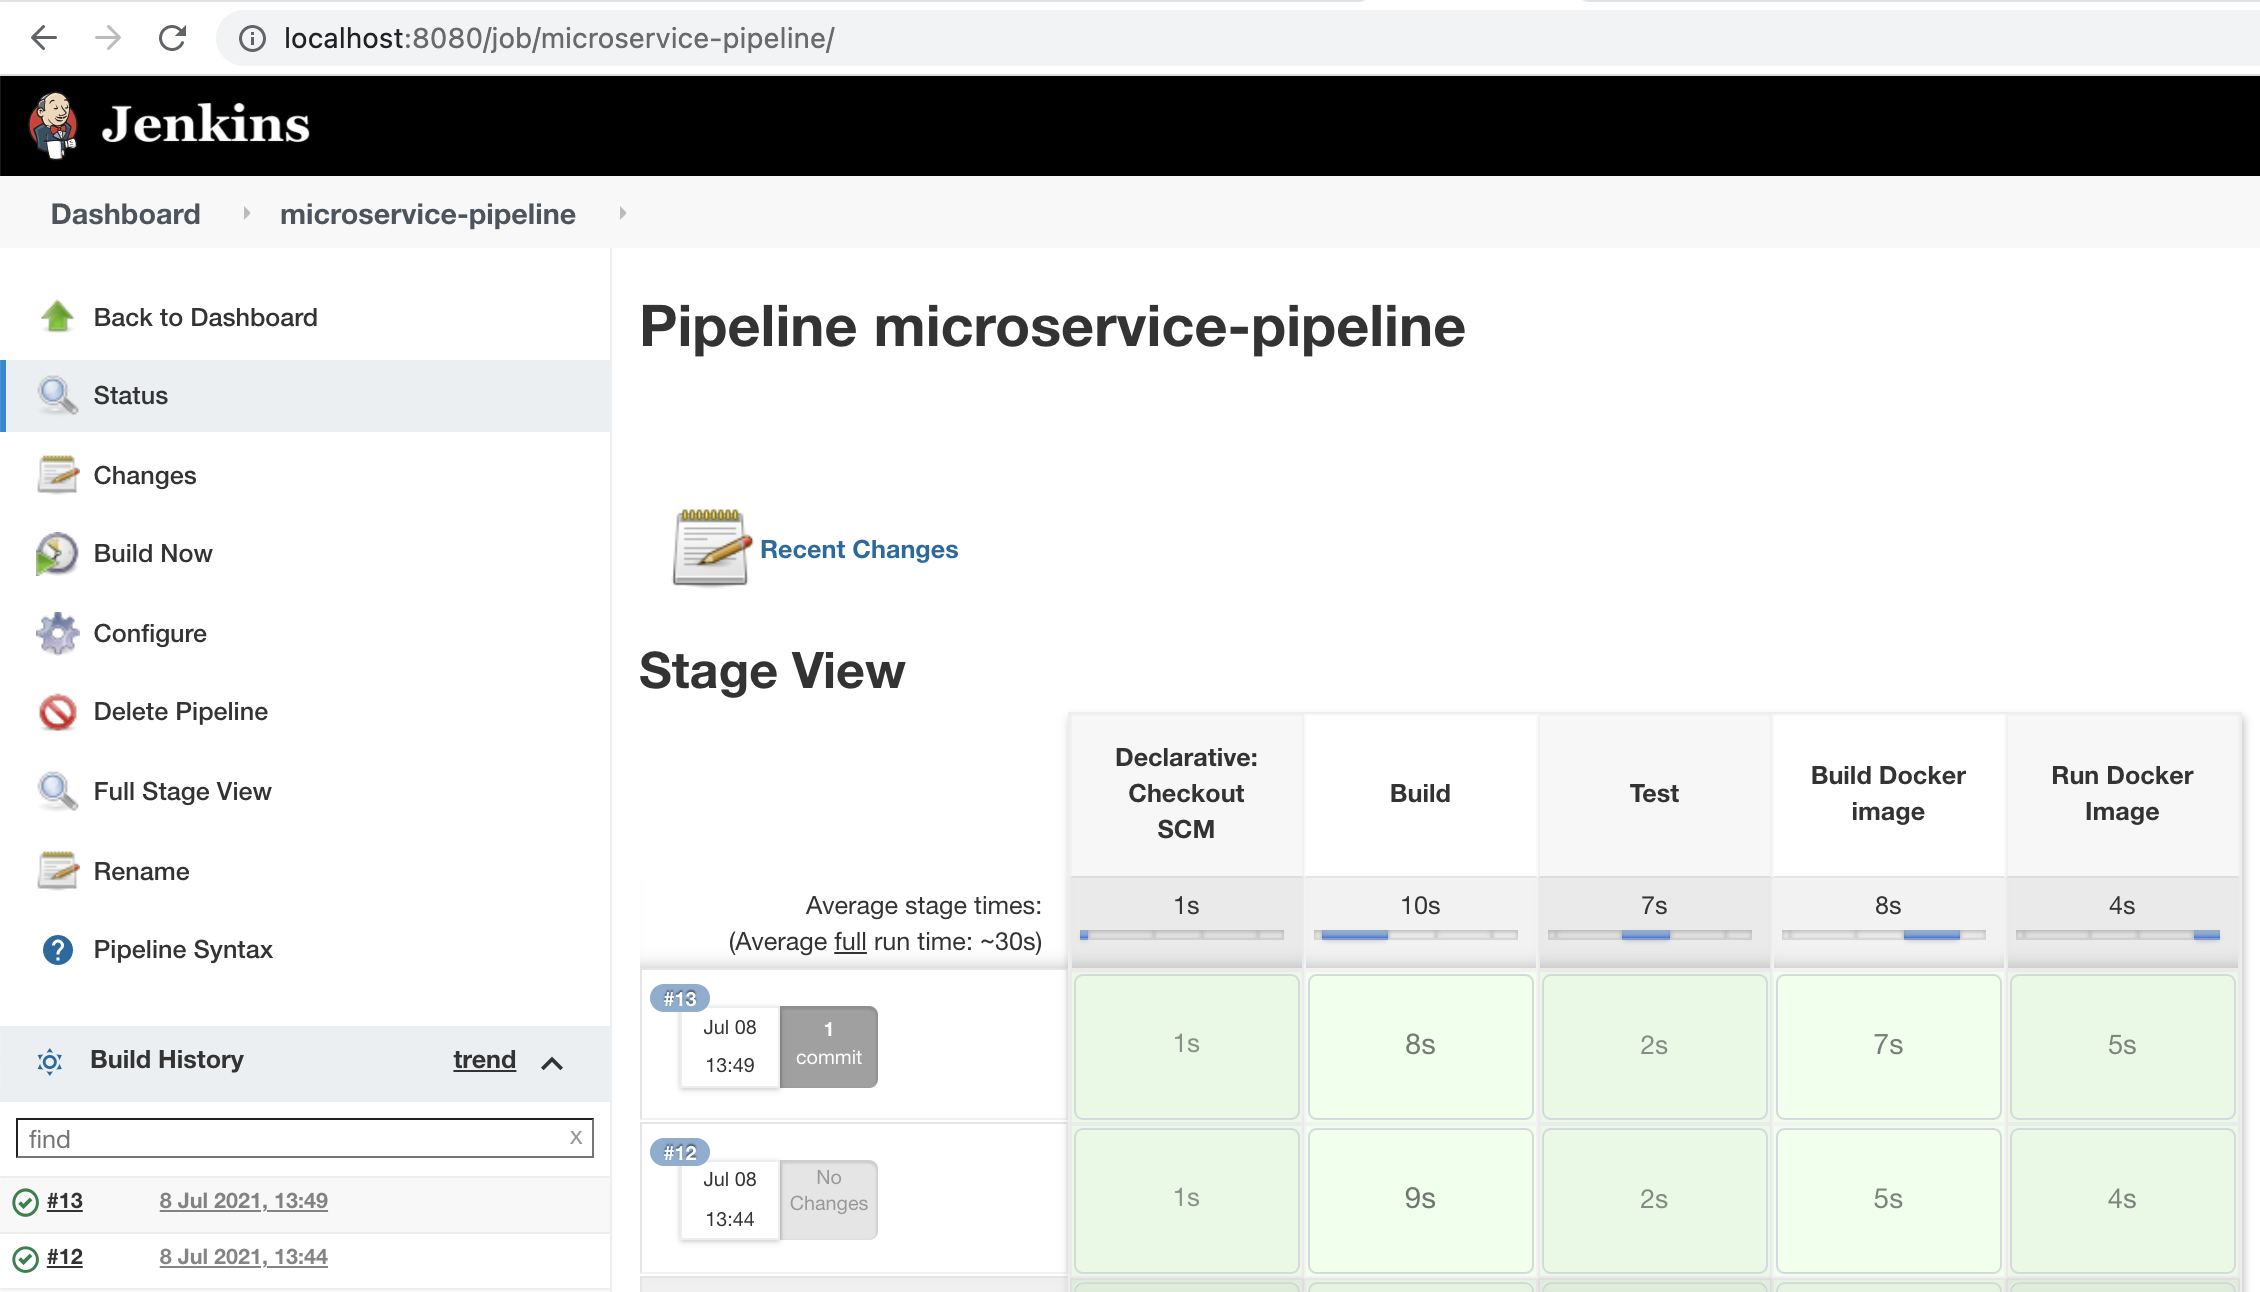 Build stages of Jenkins pipeline